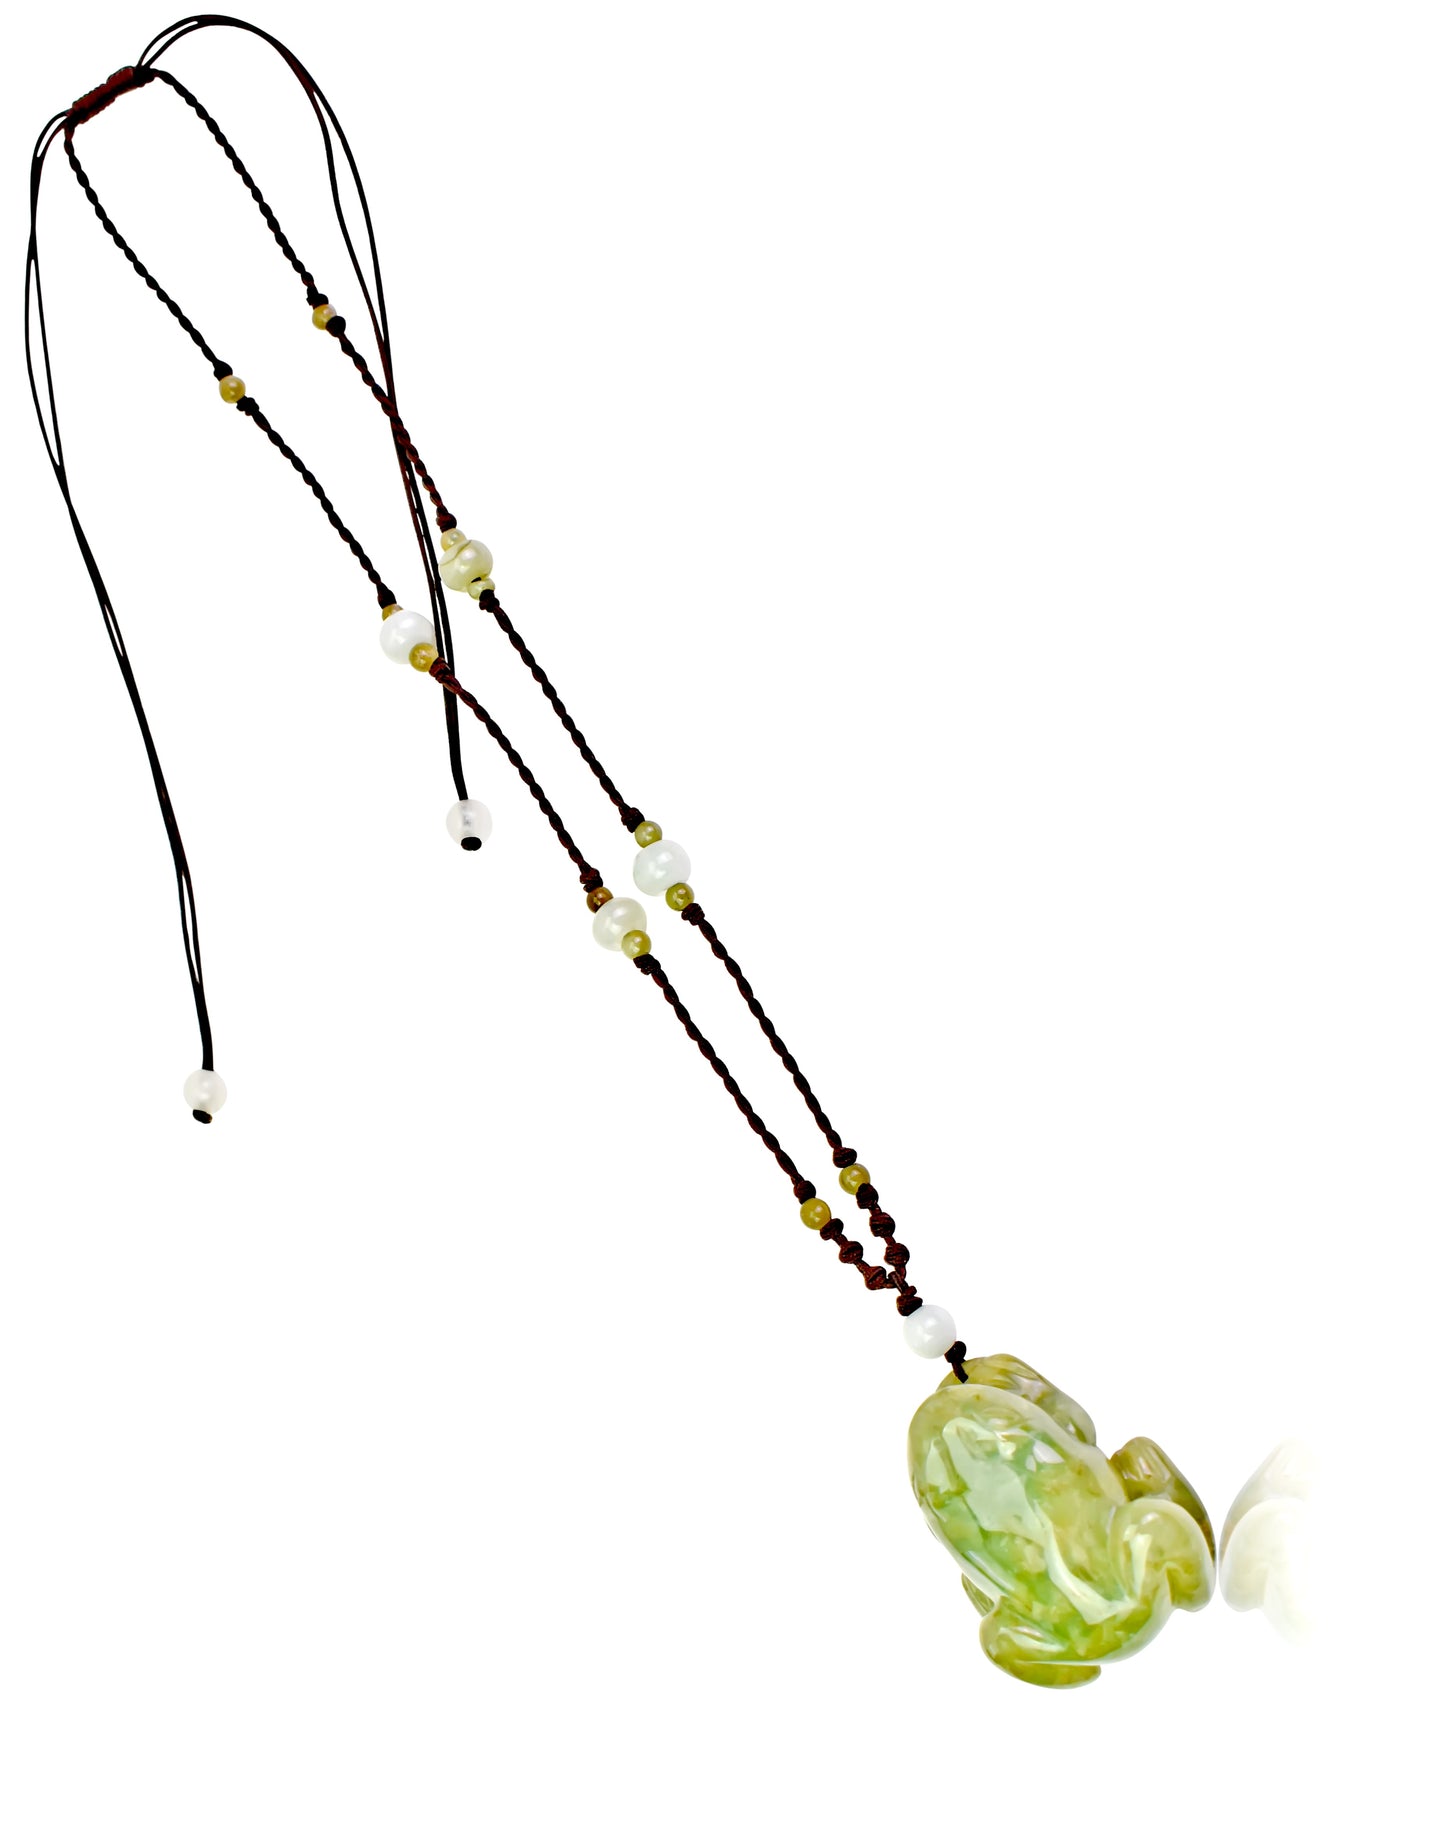 Wear the Power of Nature – Frog Handmade Jade Necklace